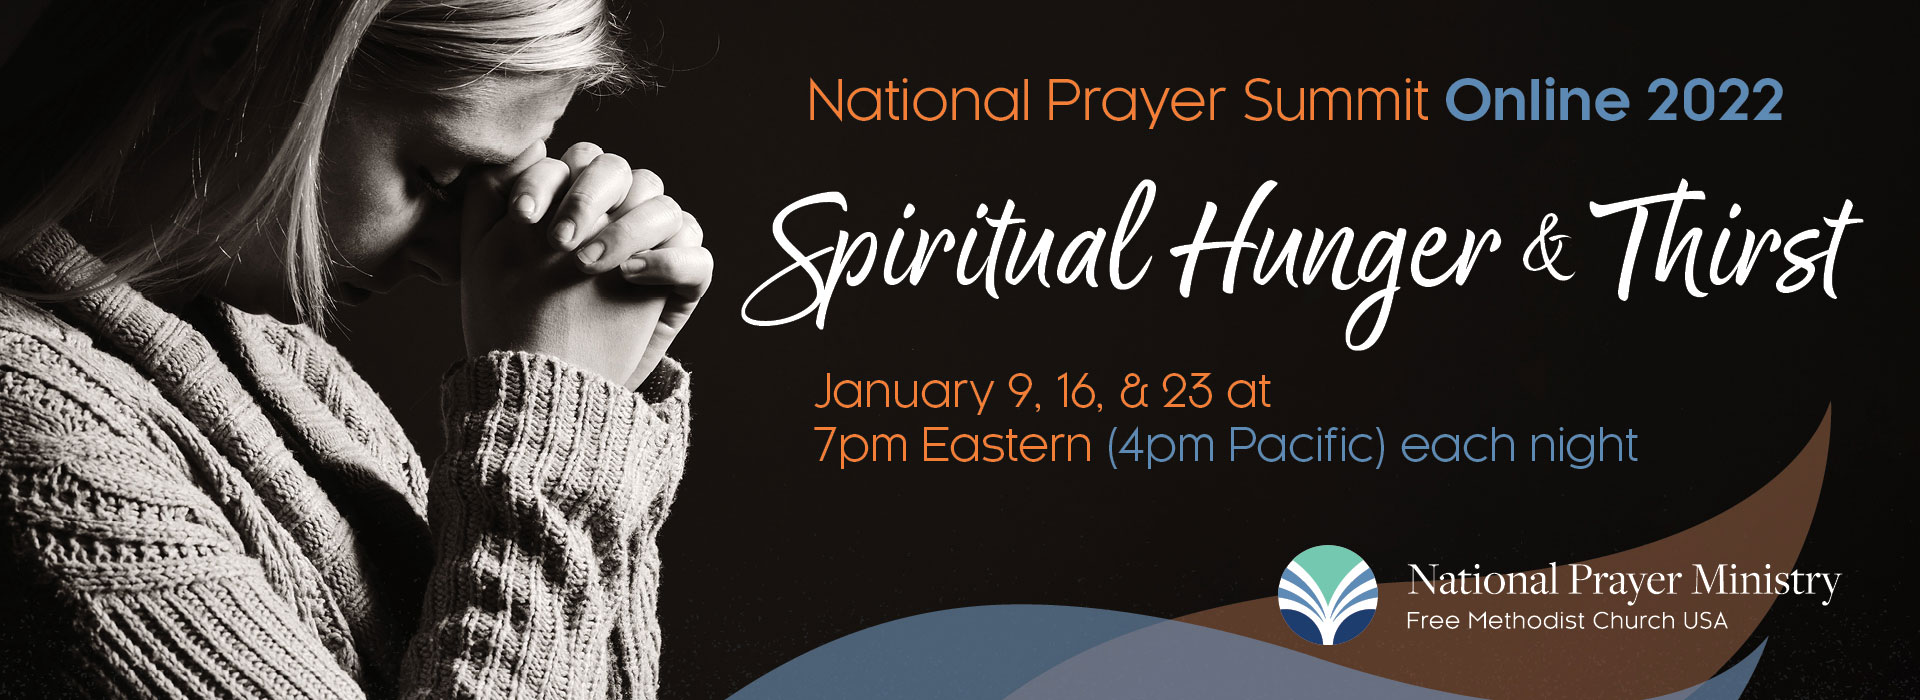 National Prayer Summit Online 2022. Spiritual Hunger & Thirst. January 9, 16, & 23 at 7pm Eastern (4pm Pacific) each night